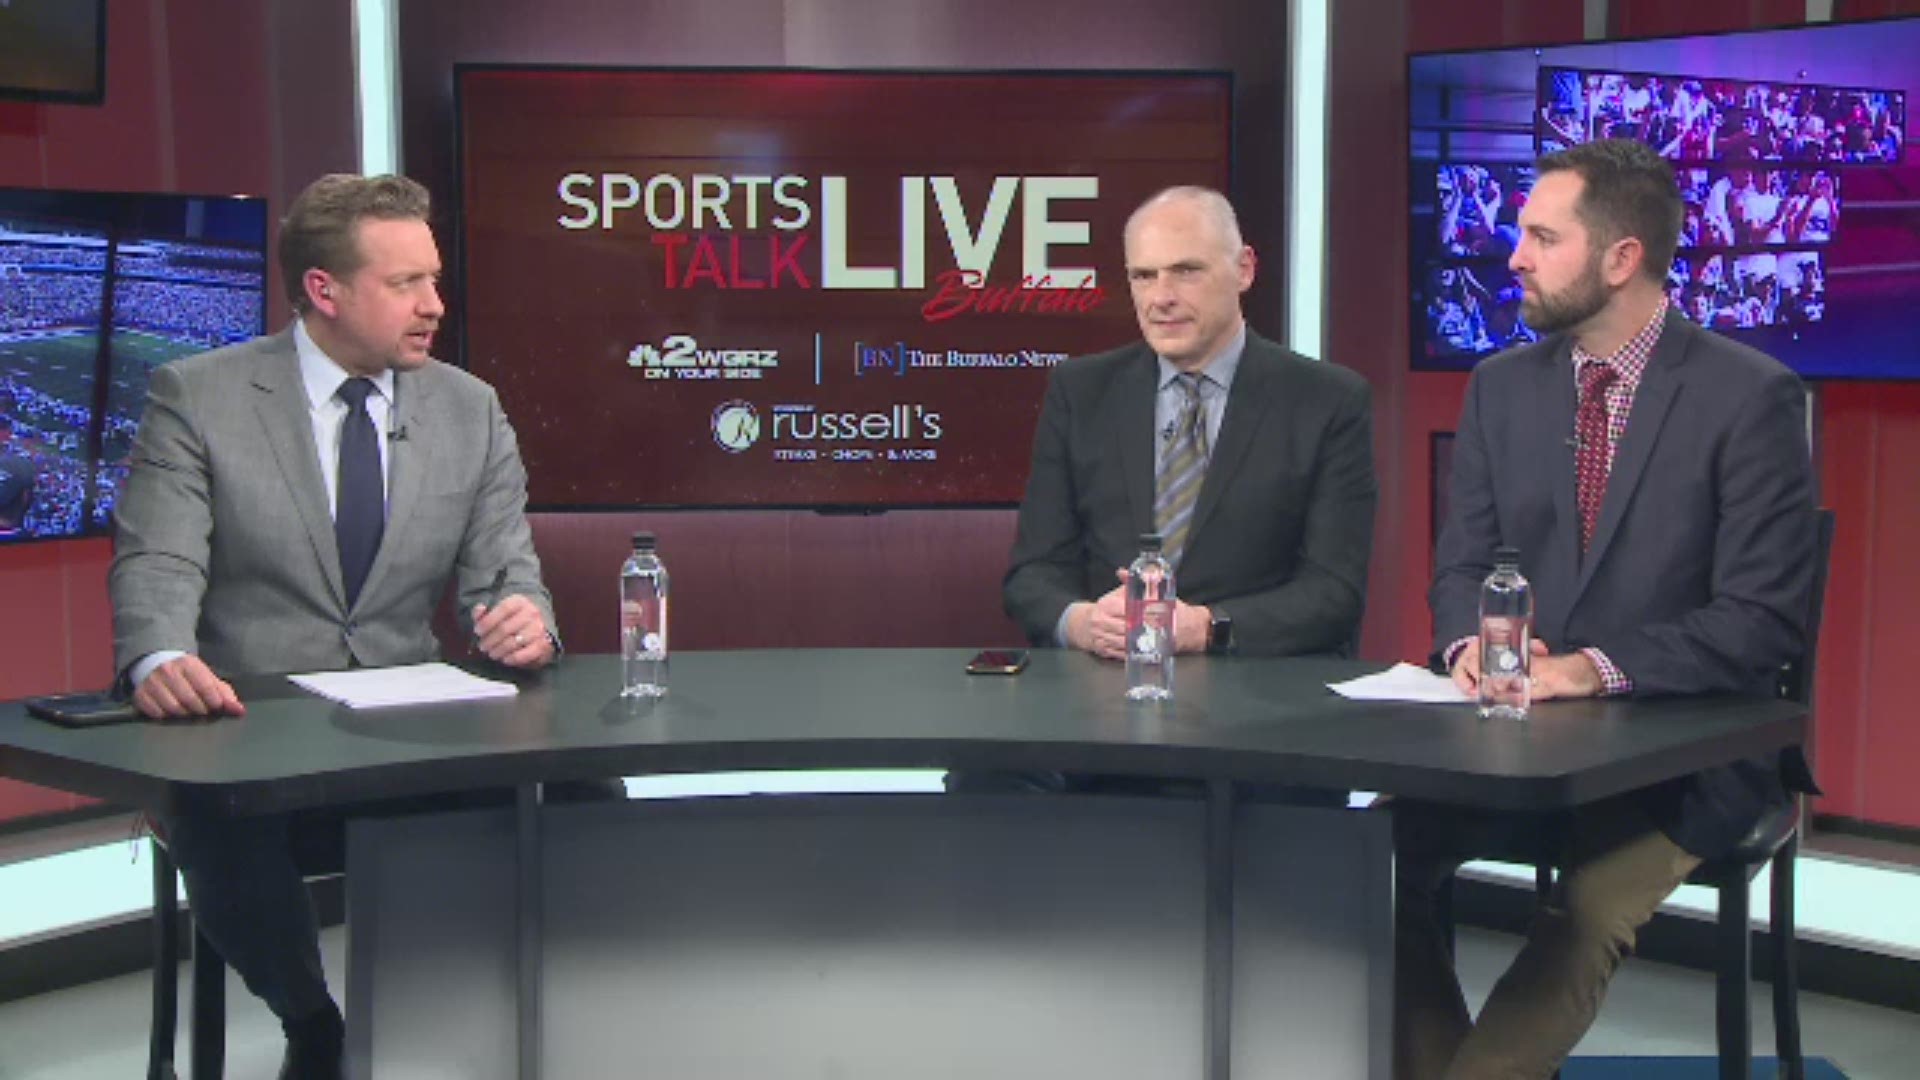 The Sports Talk Live Buffalo crew on the Bills loss to Houston and a look to the future.